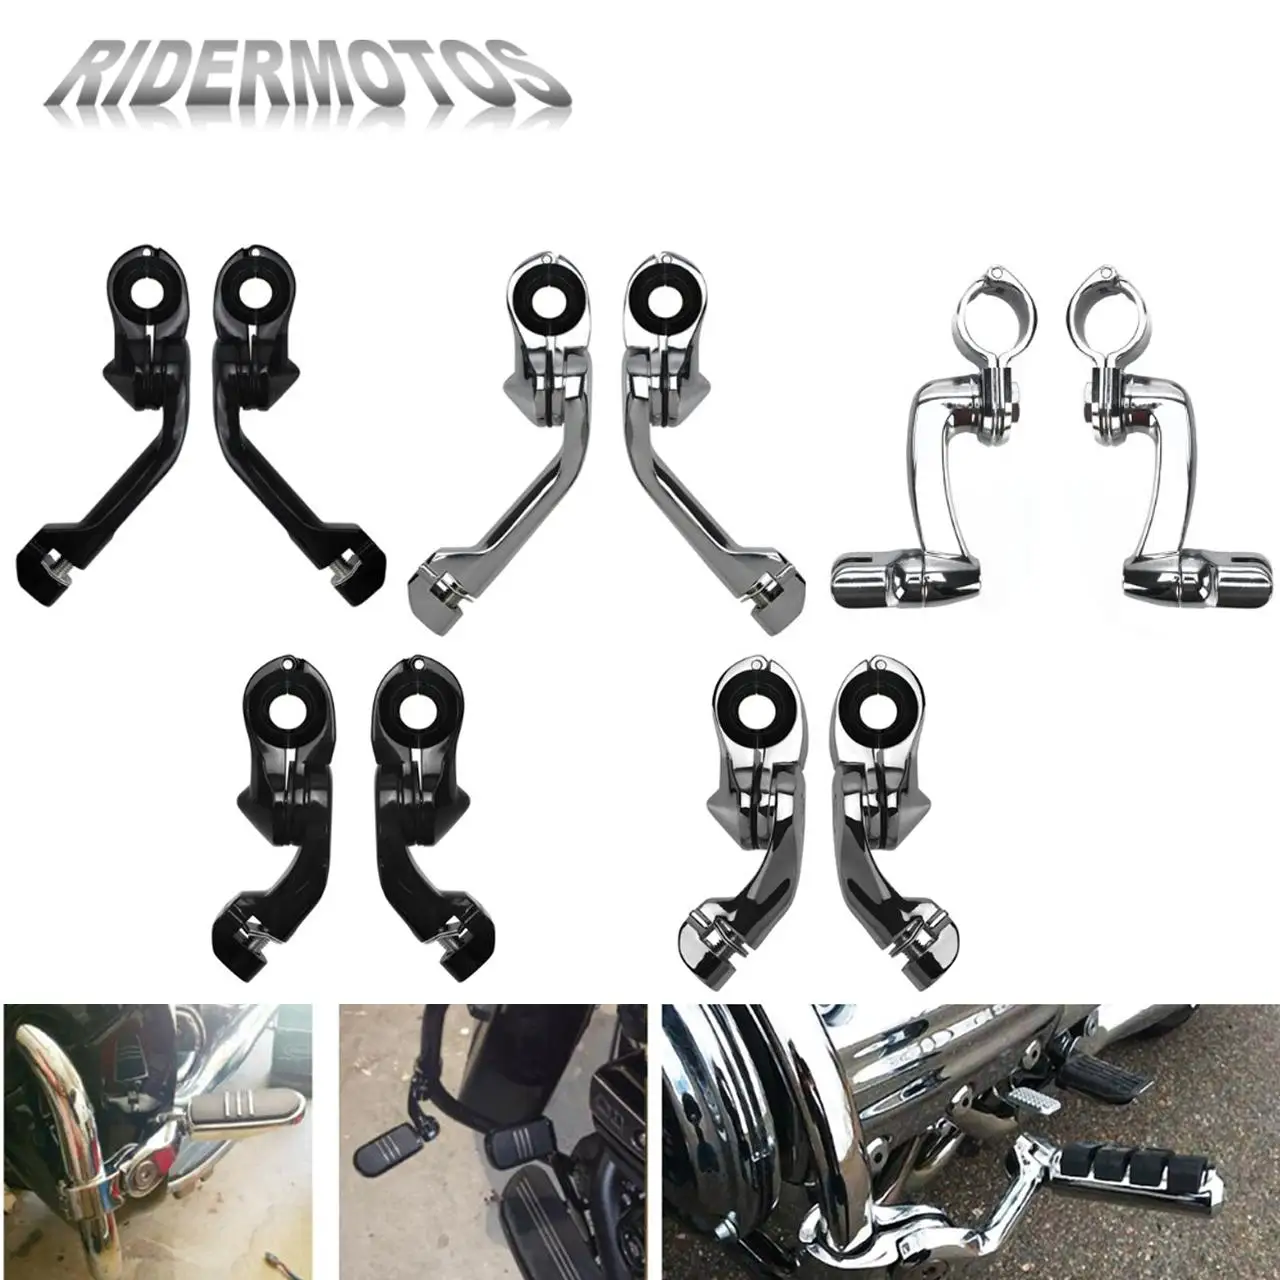 

Motorcycle 32mm Footpeg Clamp 1.25" Highway Engine Guards Foot Pegs Mount Kit Short/Long Angled For Harley Sportster XLL883 Dyna